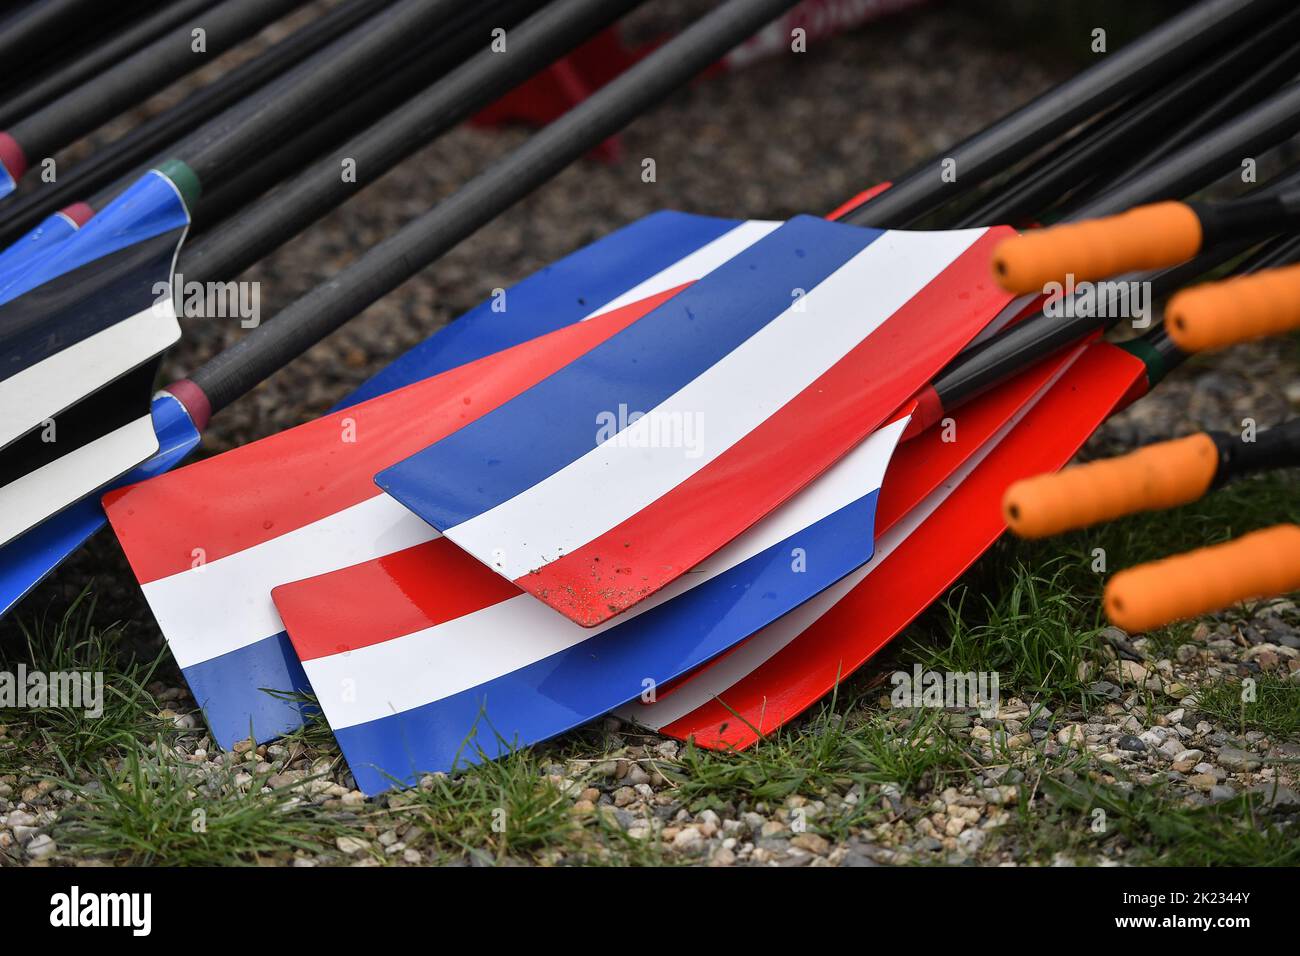 Racice, Czech Republic - September 21of Netherlands rowing blade during Day 4 of the 2022 World Rowing Championships at the Labe Arena Racice on September 21, 2022 in Racice, Czech Republic. (Vit Cerny/CTK Photo/BSR Agency) Stock Photo